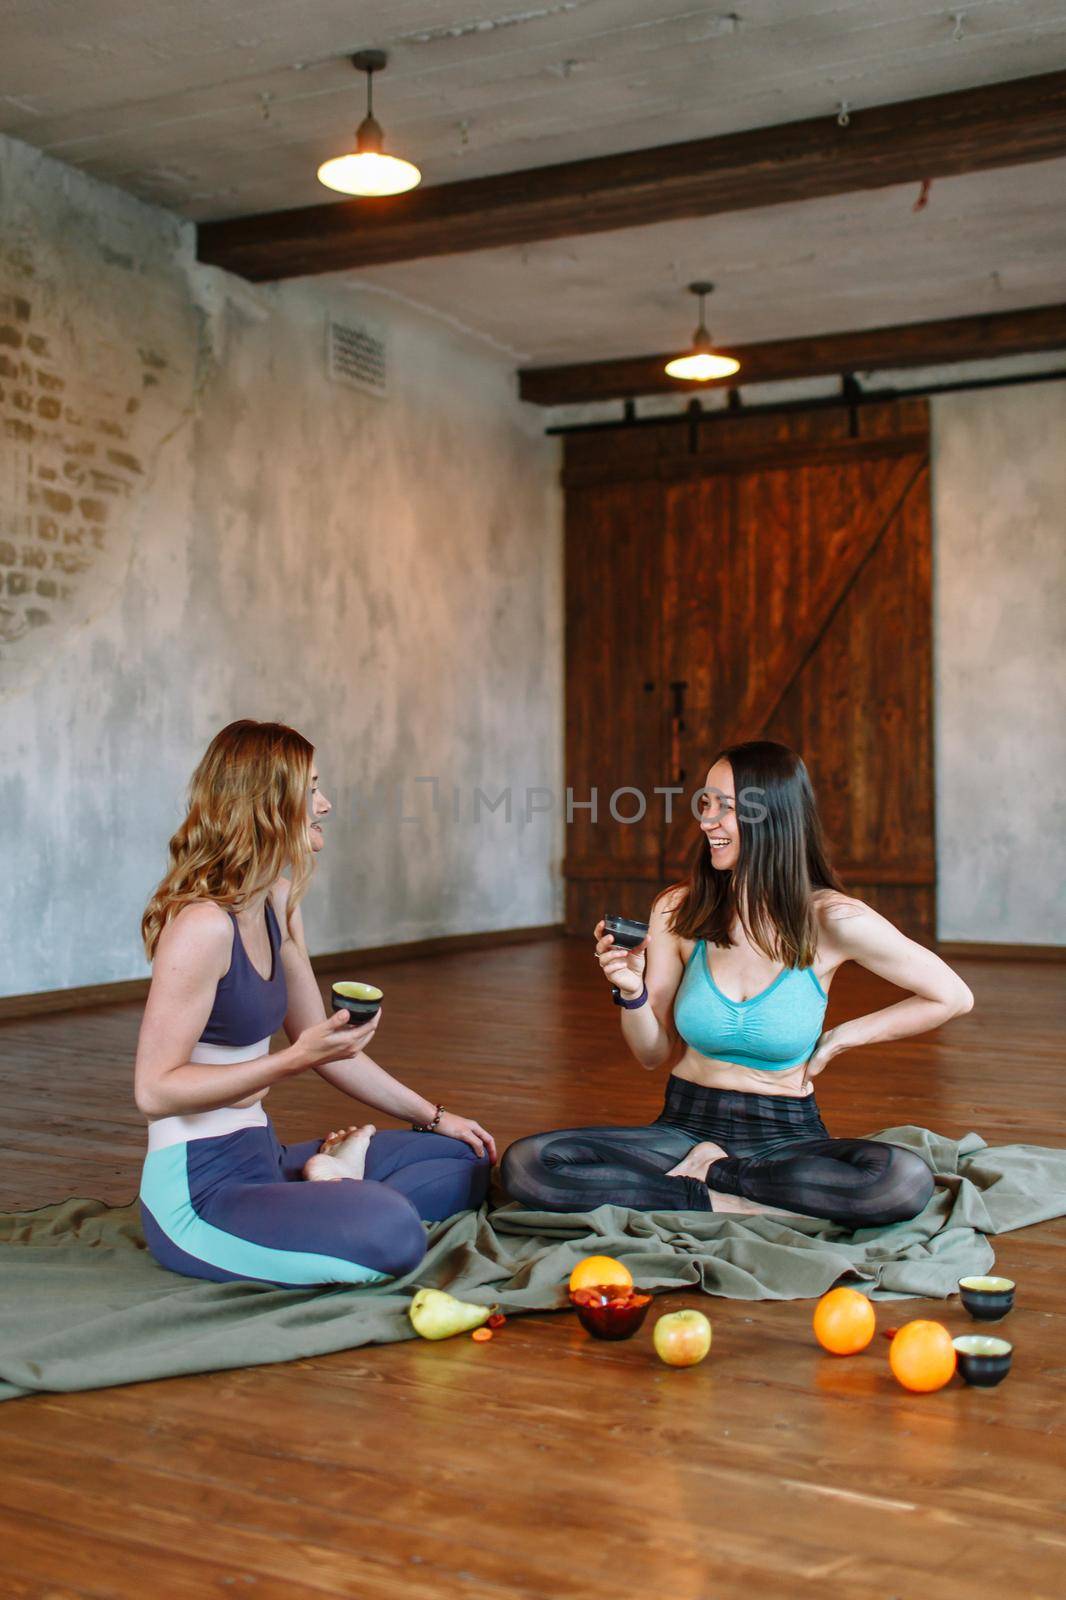 Conversation and tea party of yogis in the loft by deandy